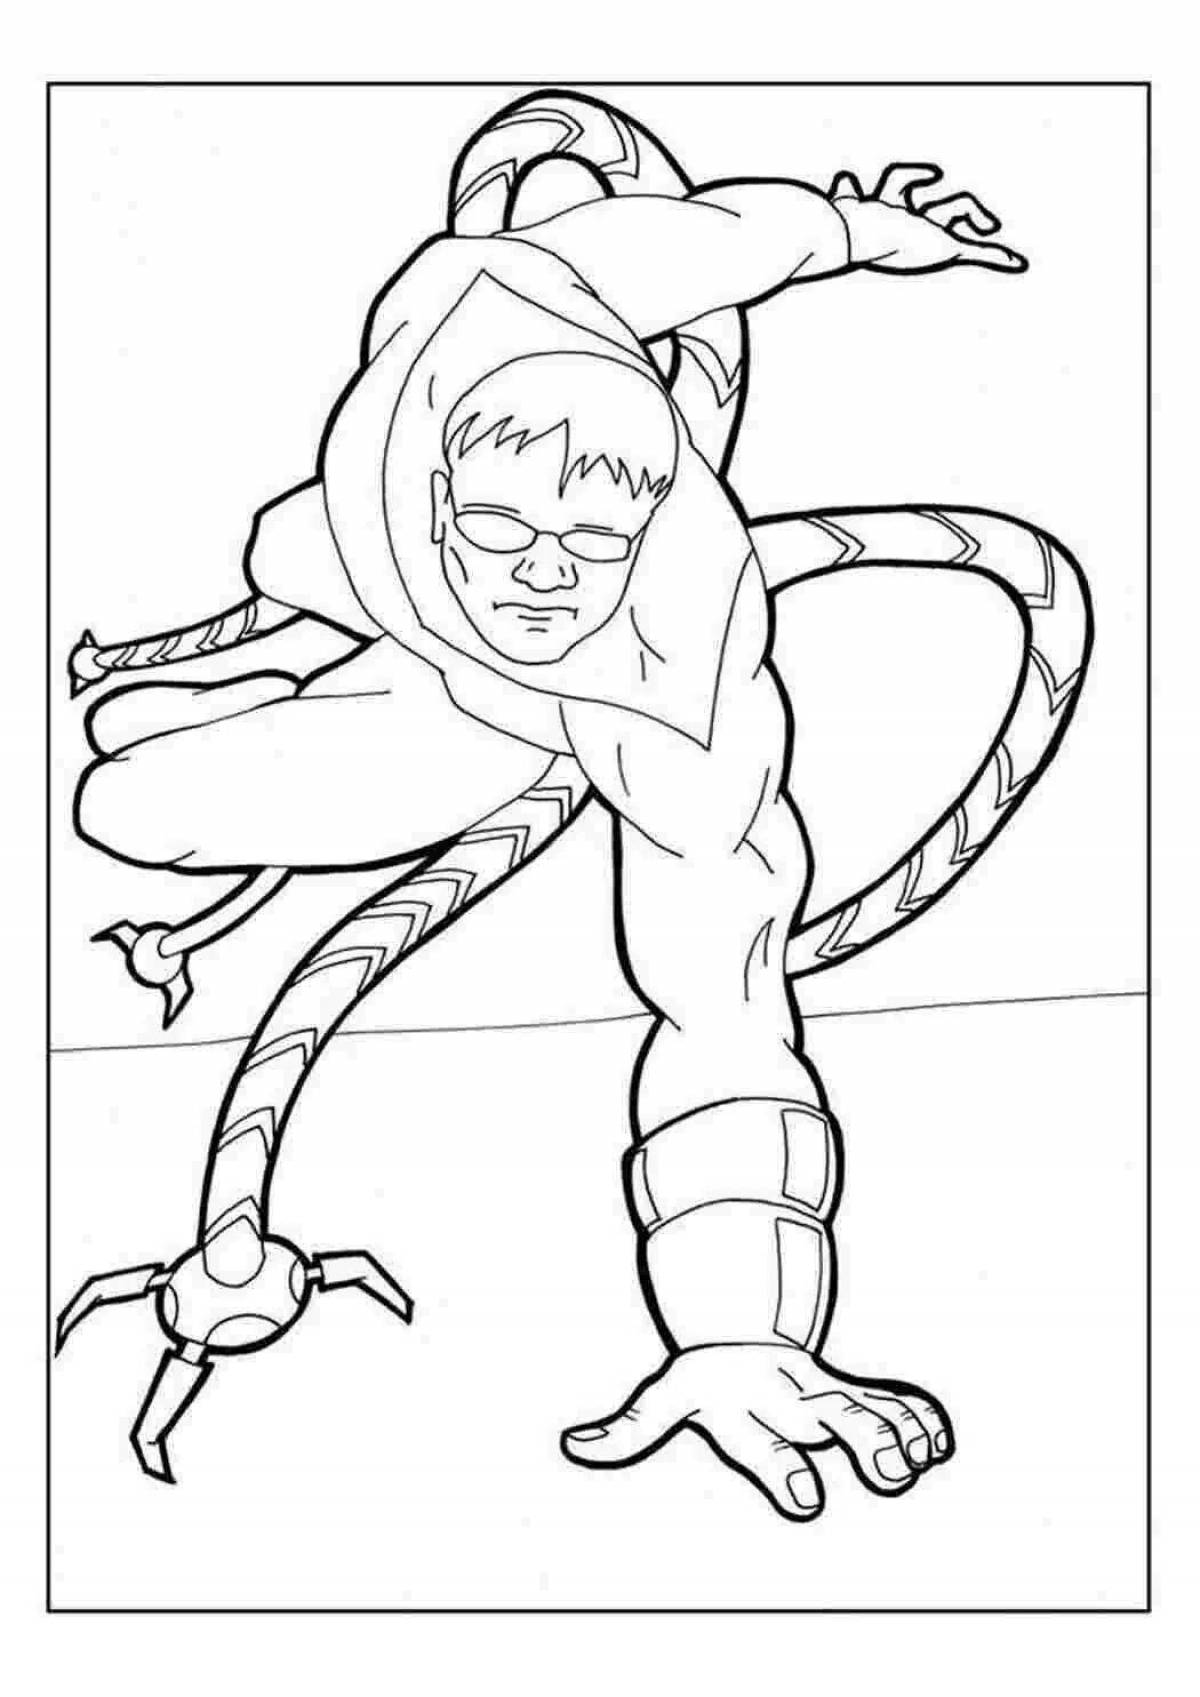 Doctor Octavius ​​coloring page